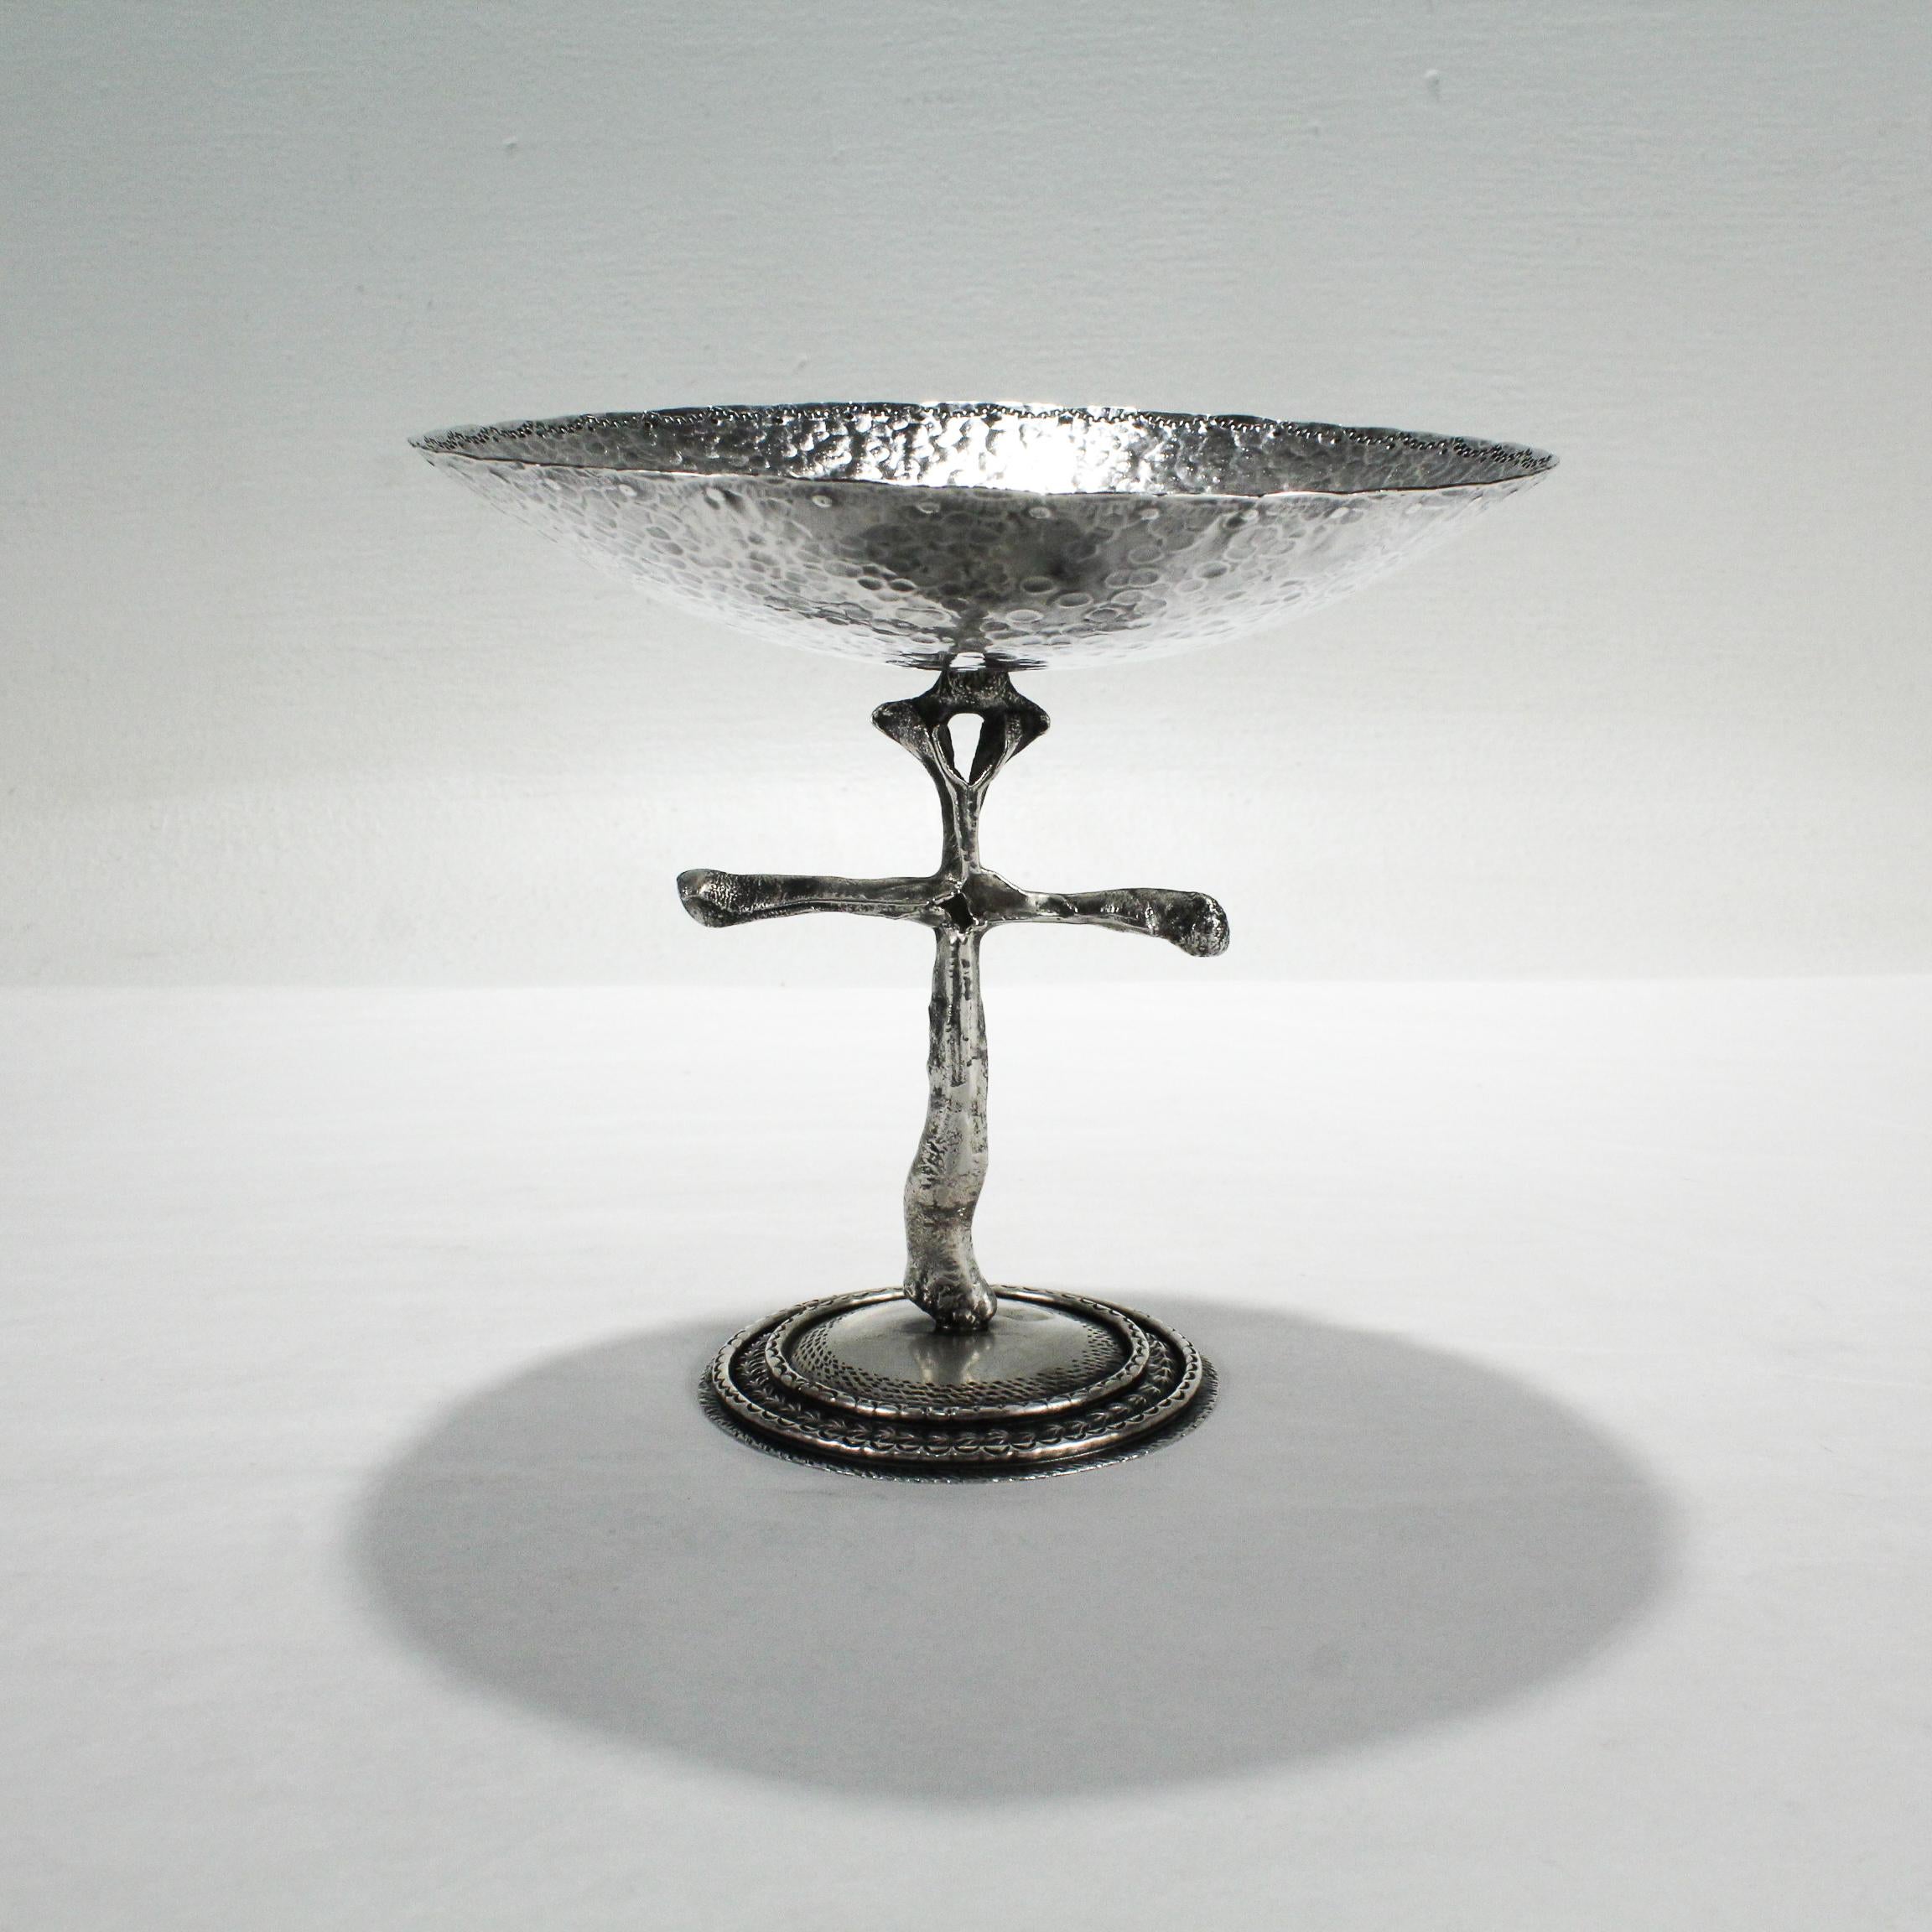 A rare tazza or compote from the renowned Southwestern jewelry artist - Billy Lee Mossman. 

In sterling silver.

With a hand chased foot supporting a cross-shaped pedestal and a hand-hammered bowl.

Simply a wonderful find from an amazing